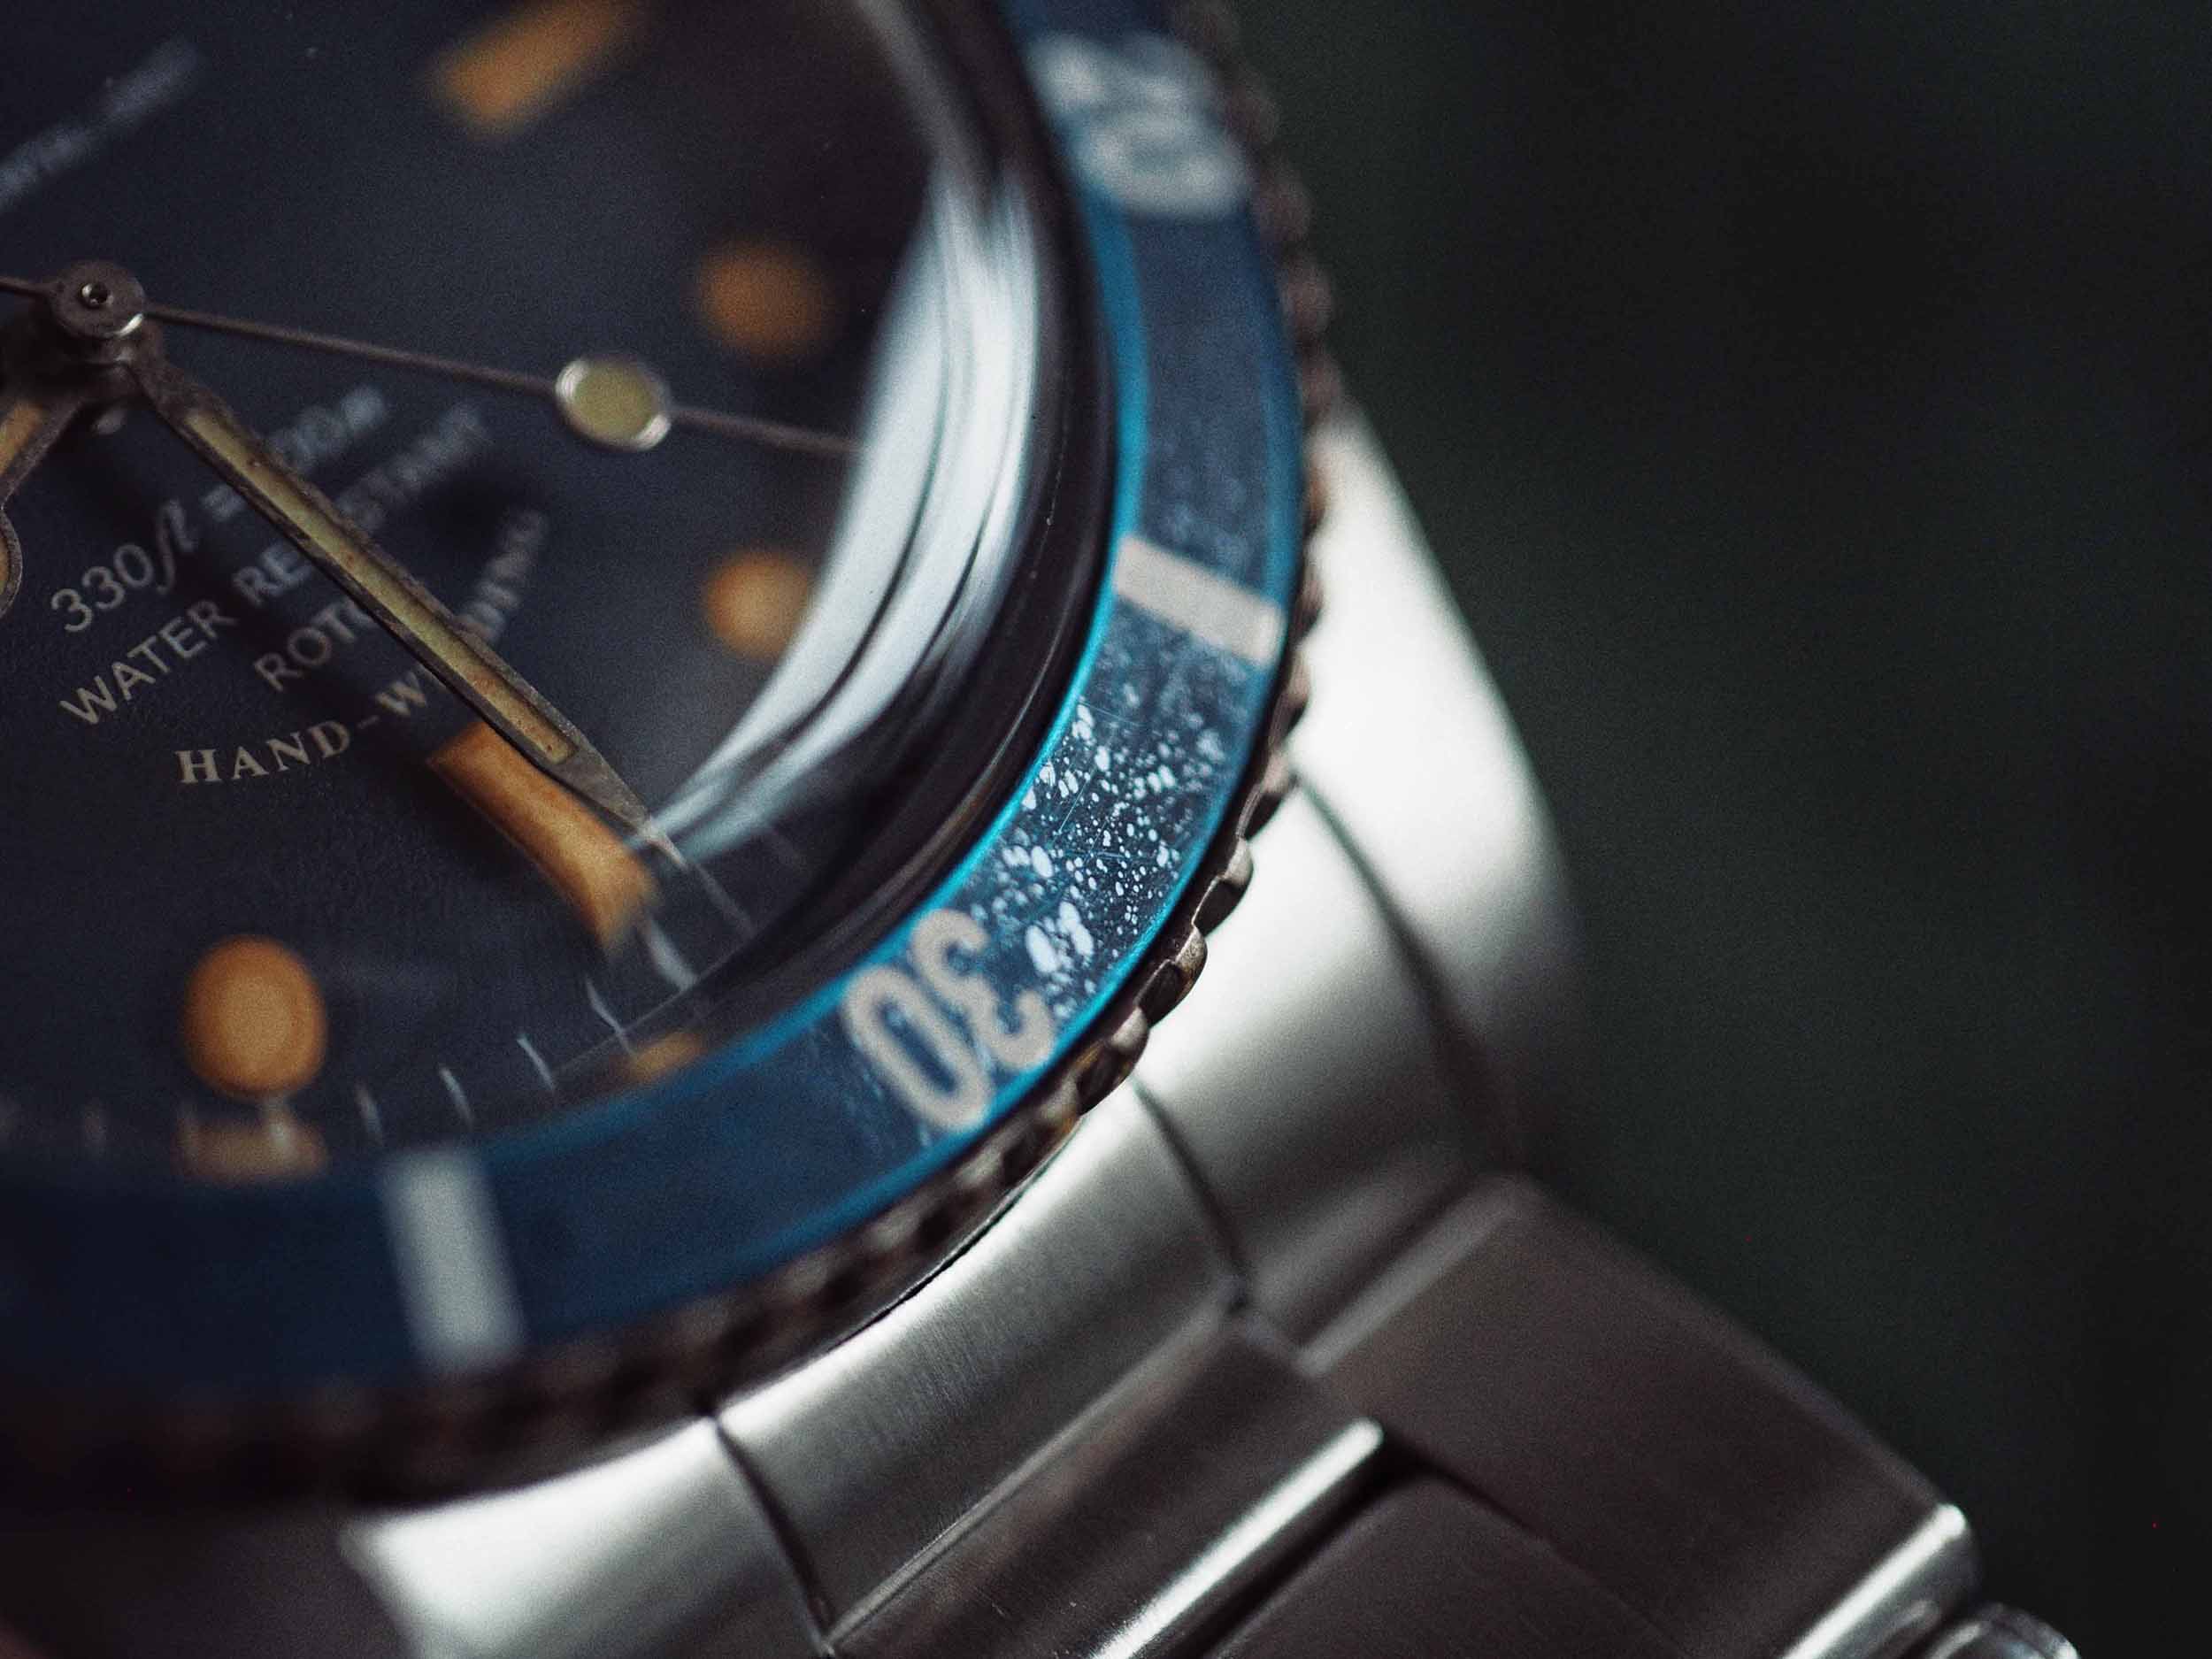 Sea Diver – Navy Aged Edition – WMTWatch